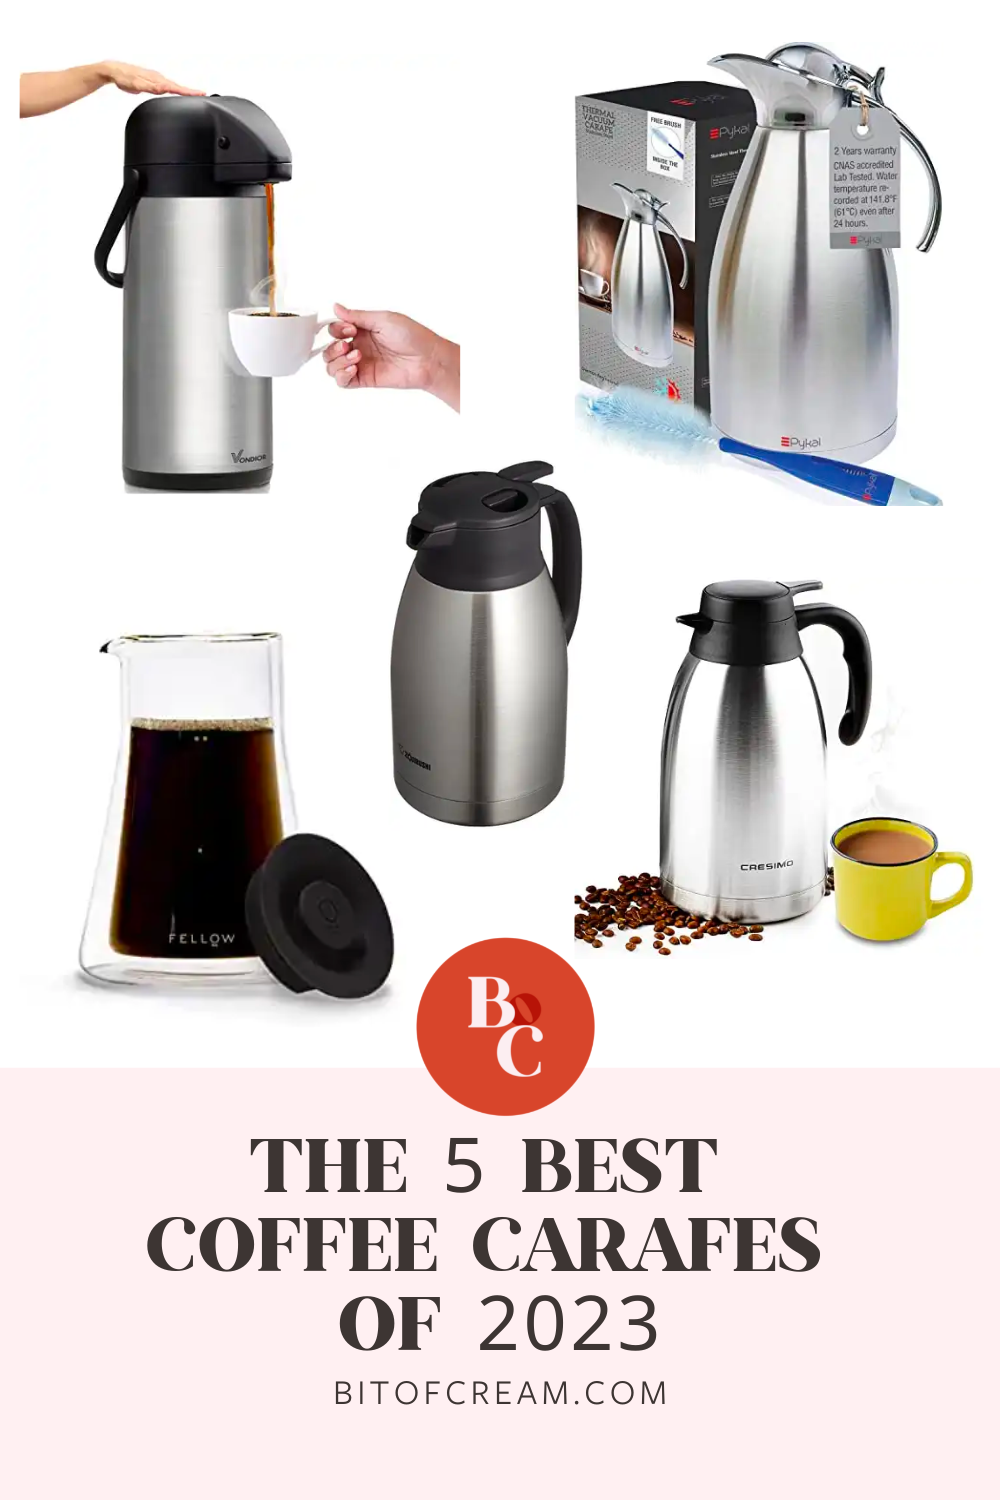 5 Best Coffee Carafes of 2023